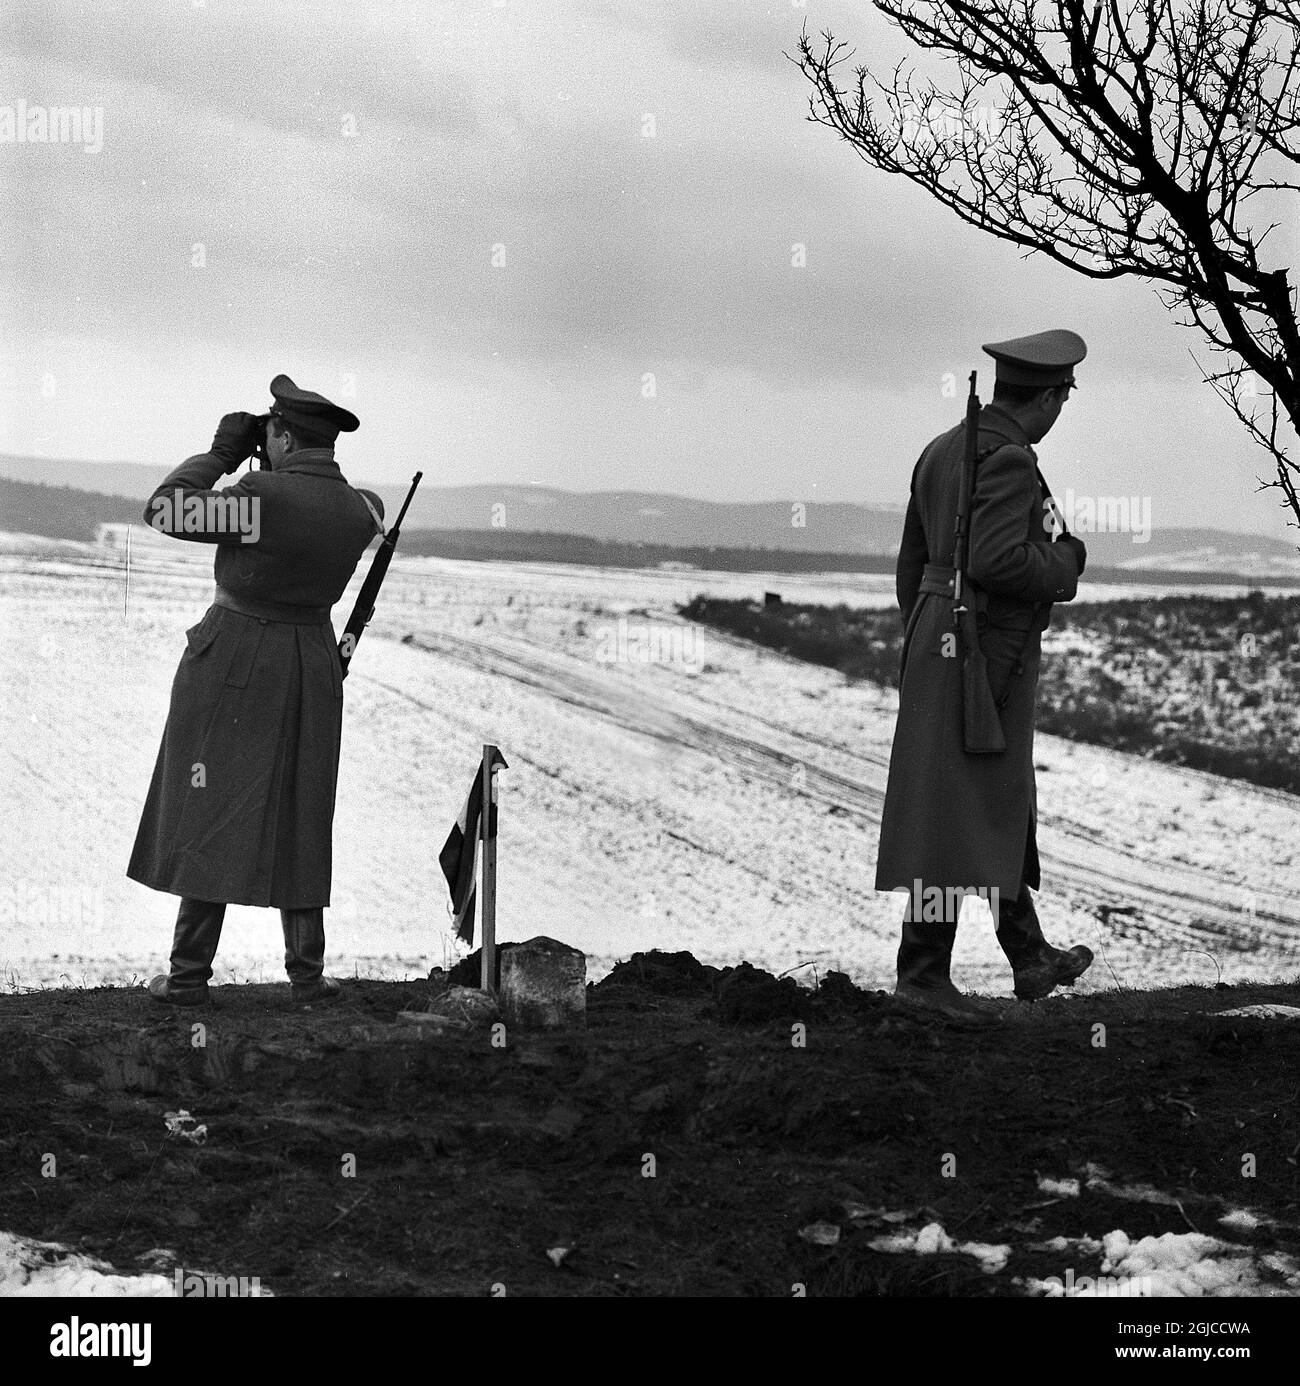 AUSTRIA 1956 Austrian guards patrolling the border to Hungary, close to Nickelsdorf, Austria, during the nationwide revolution in Hungary against the Hungarian People's Republic and its Soviet-imposed policies, lasting from 23 October until 10 November 1956. Photo: Anders Engman / Bonnierarkivet / TT / kod: 3010  Stock Photo